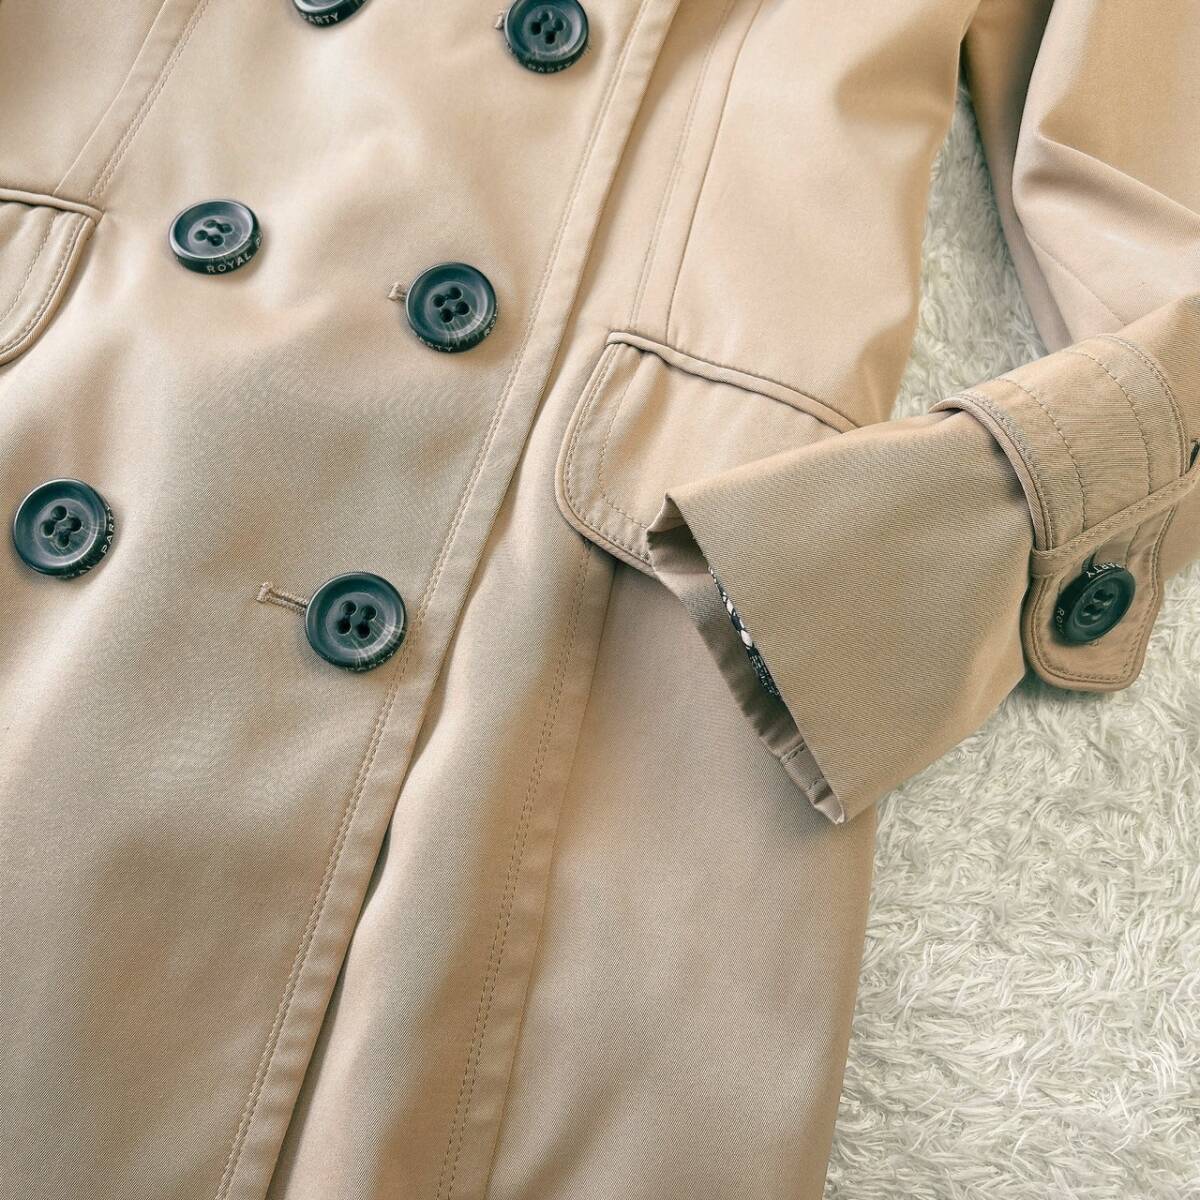 [ROYAL PARTY Royal party ] trench coat lining total pattern lady's 36 springs outer Camel button Logo Rstore43112